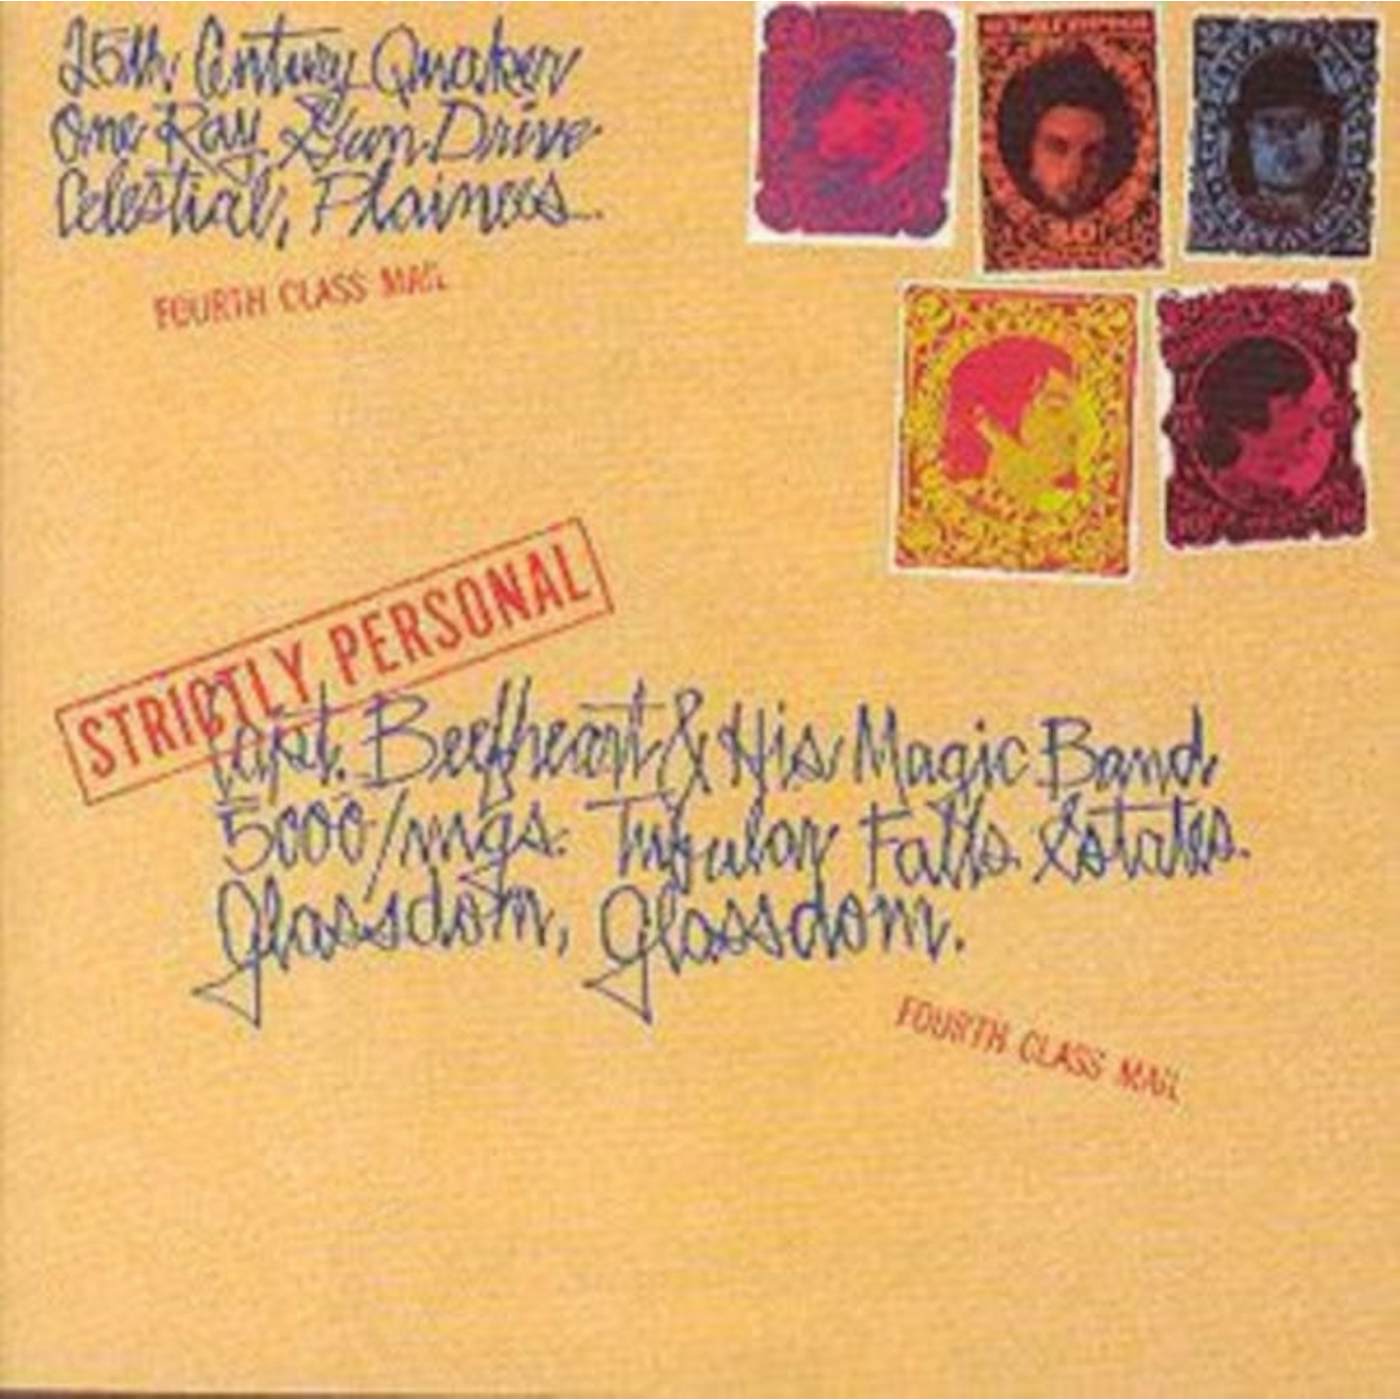 Captain Beefheart & His Magic Band CD - Strictly Personal